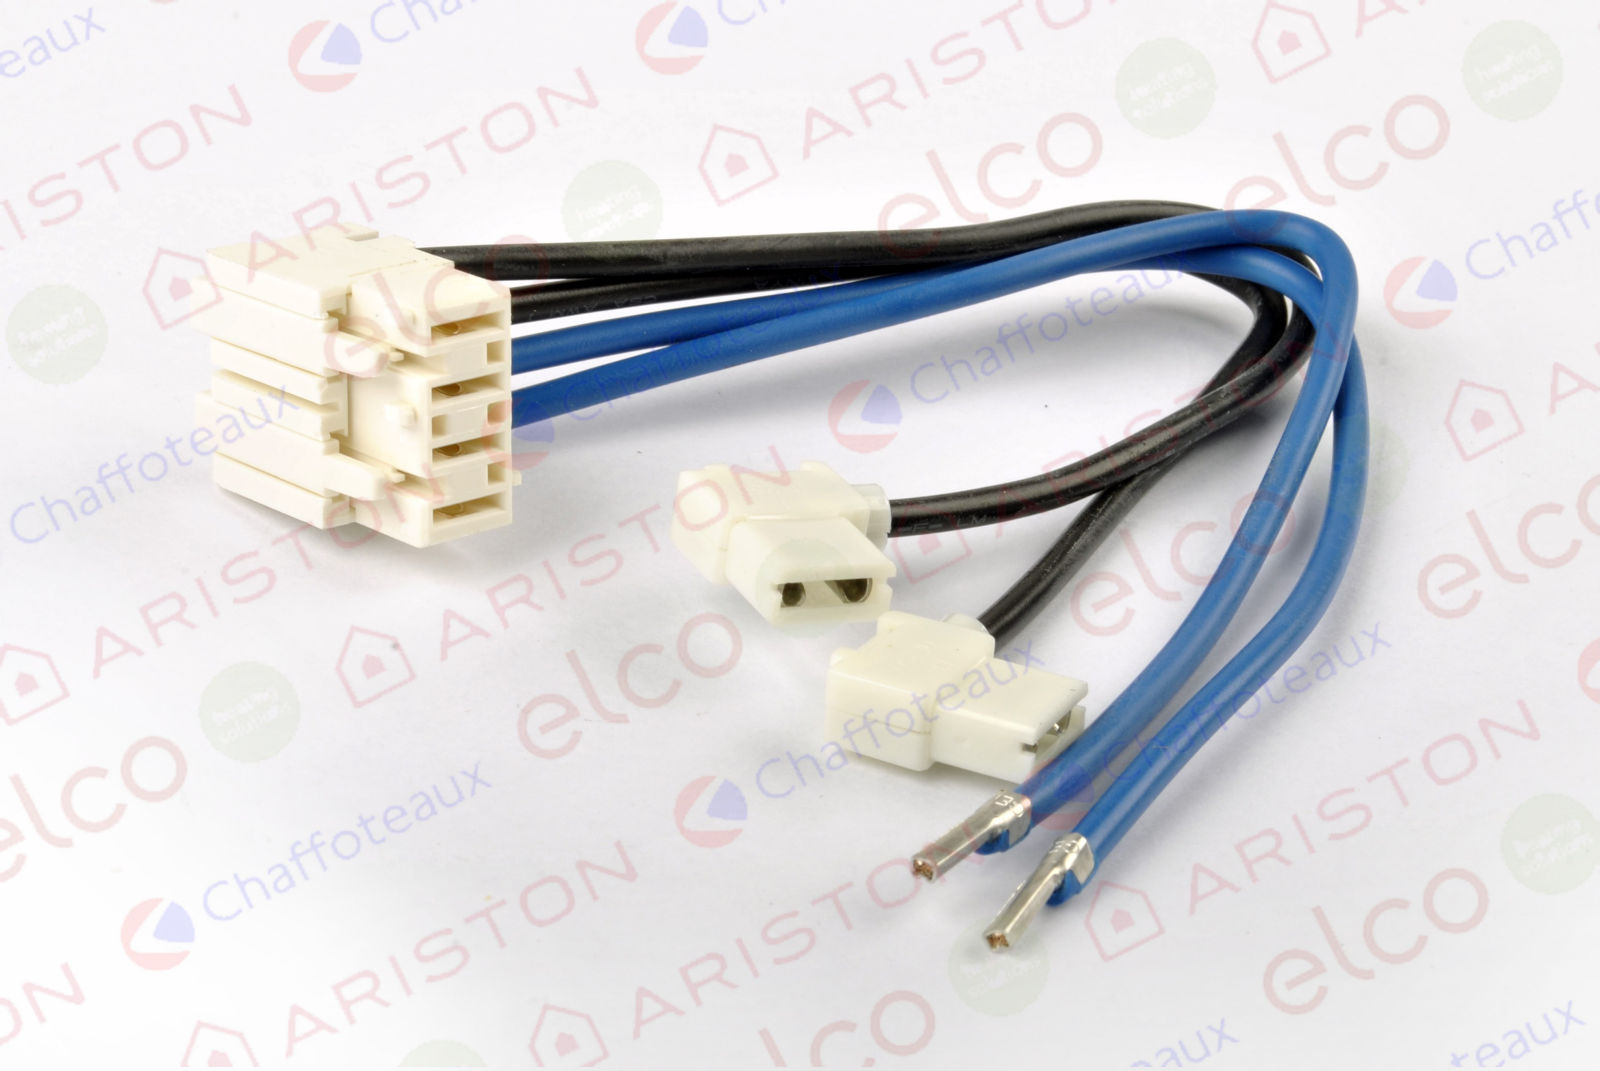 60001765 MAIN PCB CABLE (POWER SUPPLY)